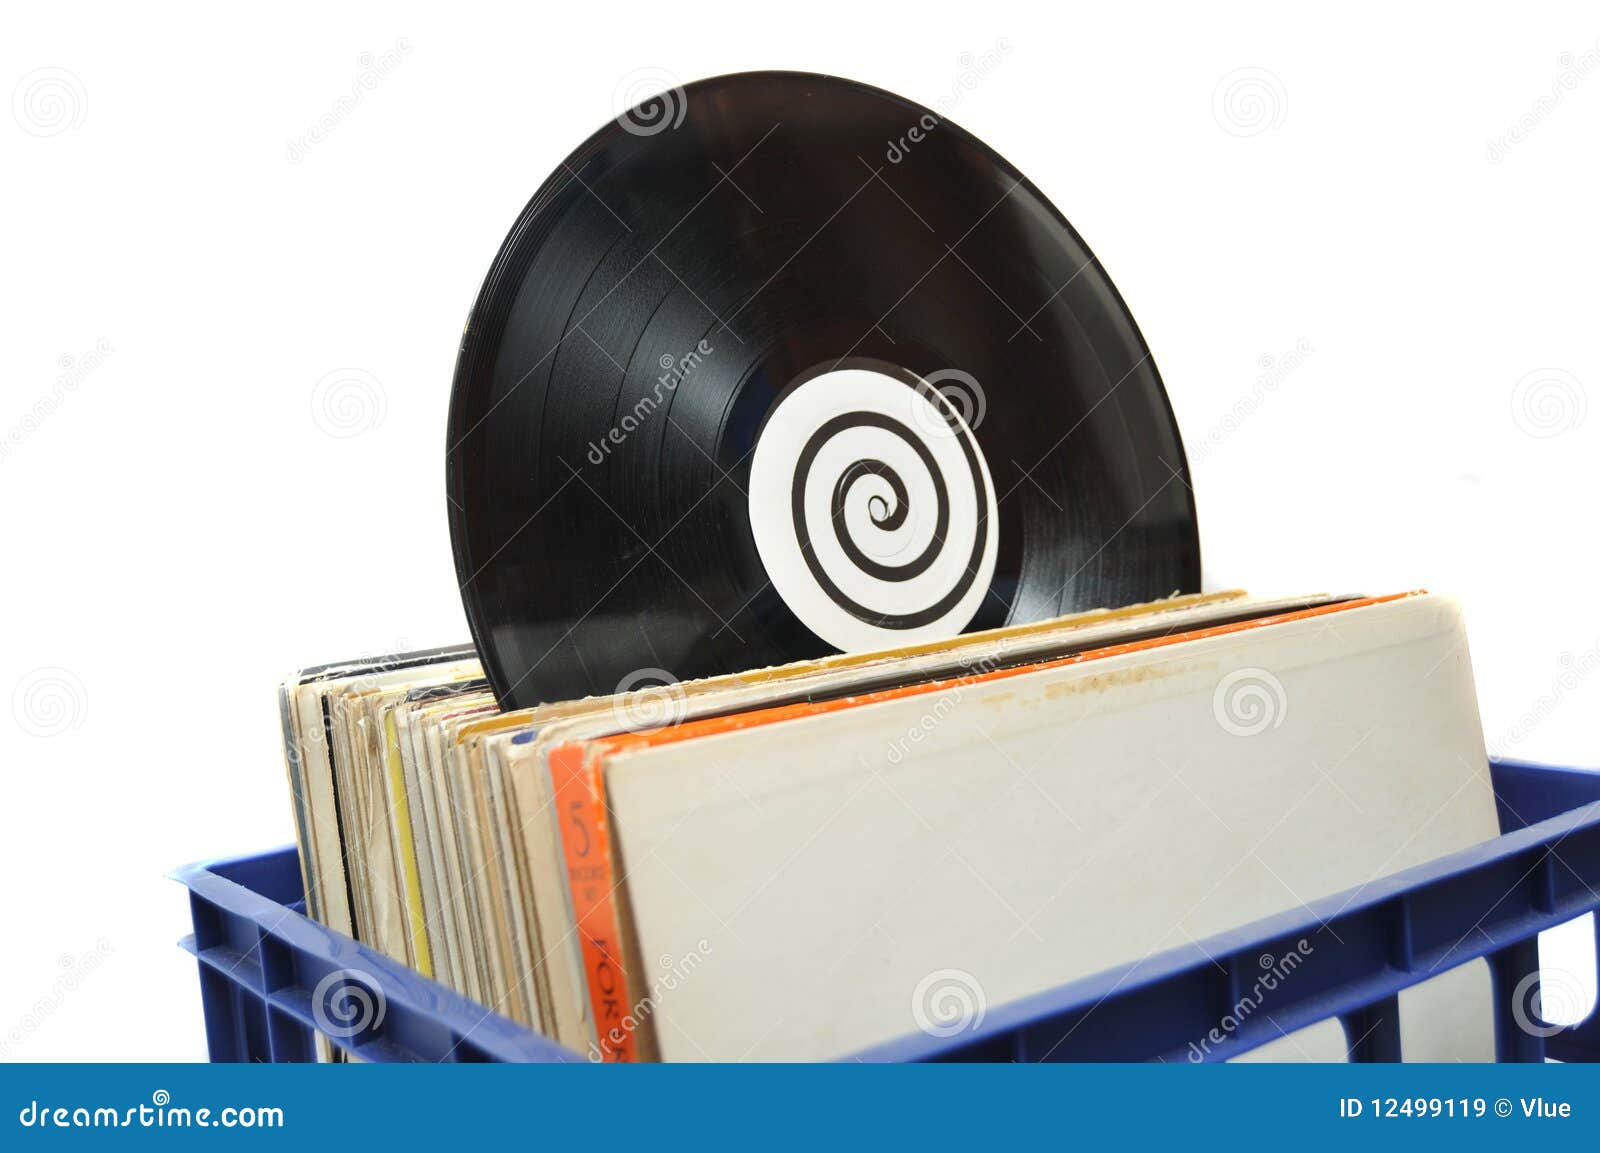 vinyl lp record collection in crate